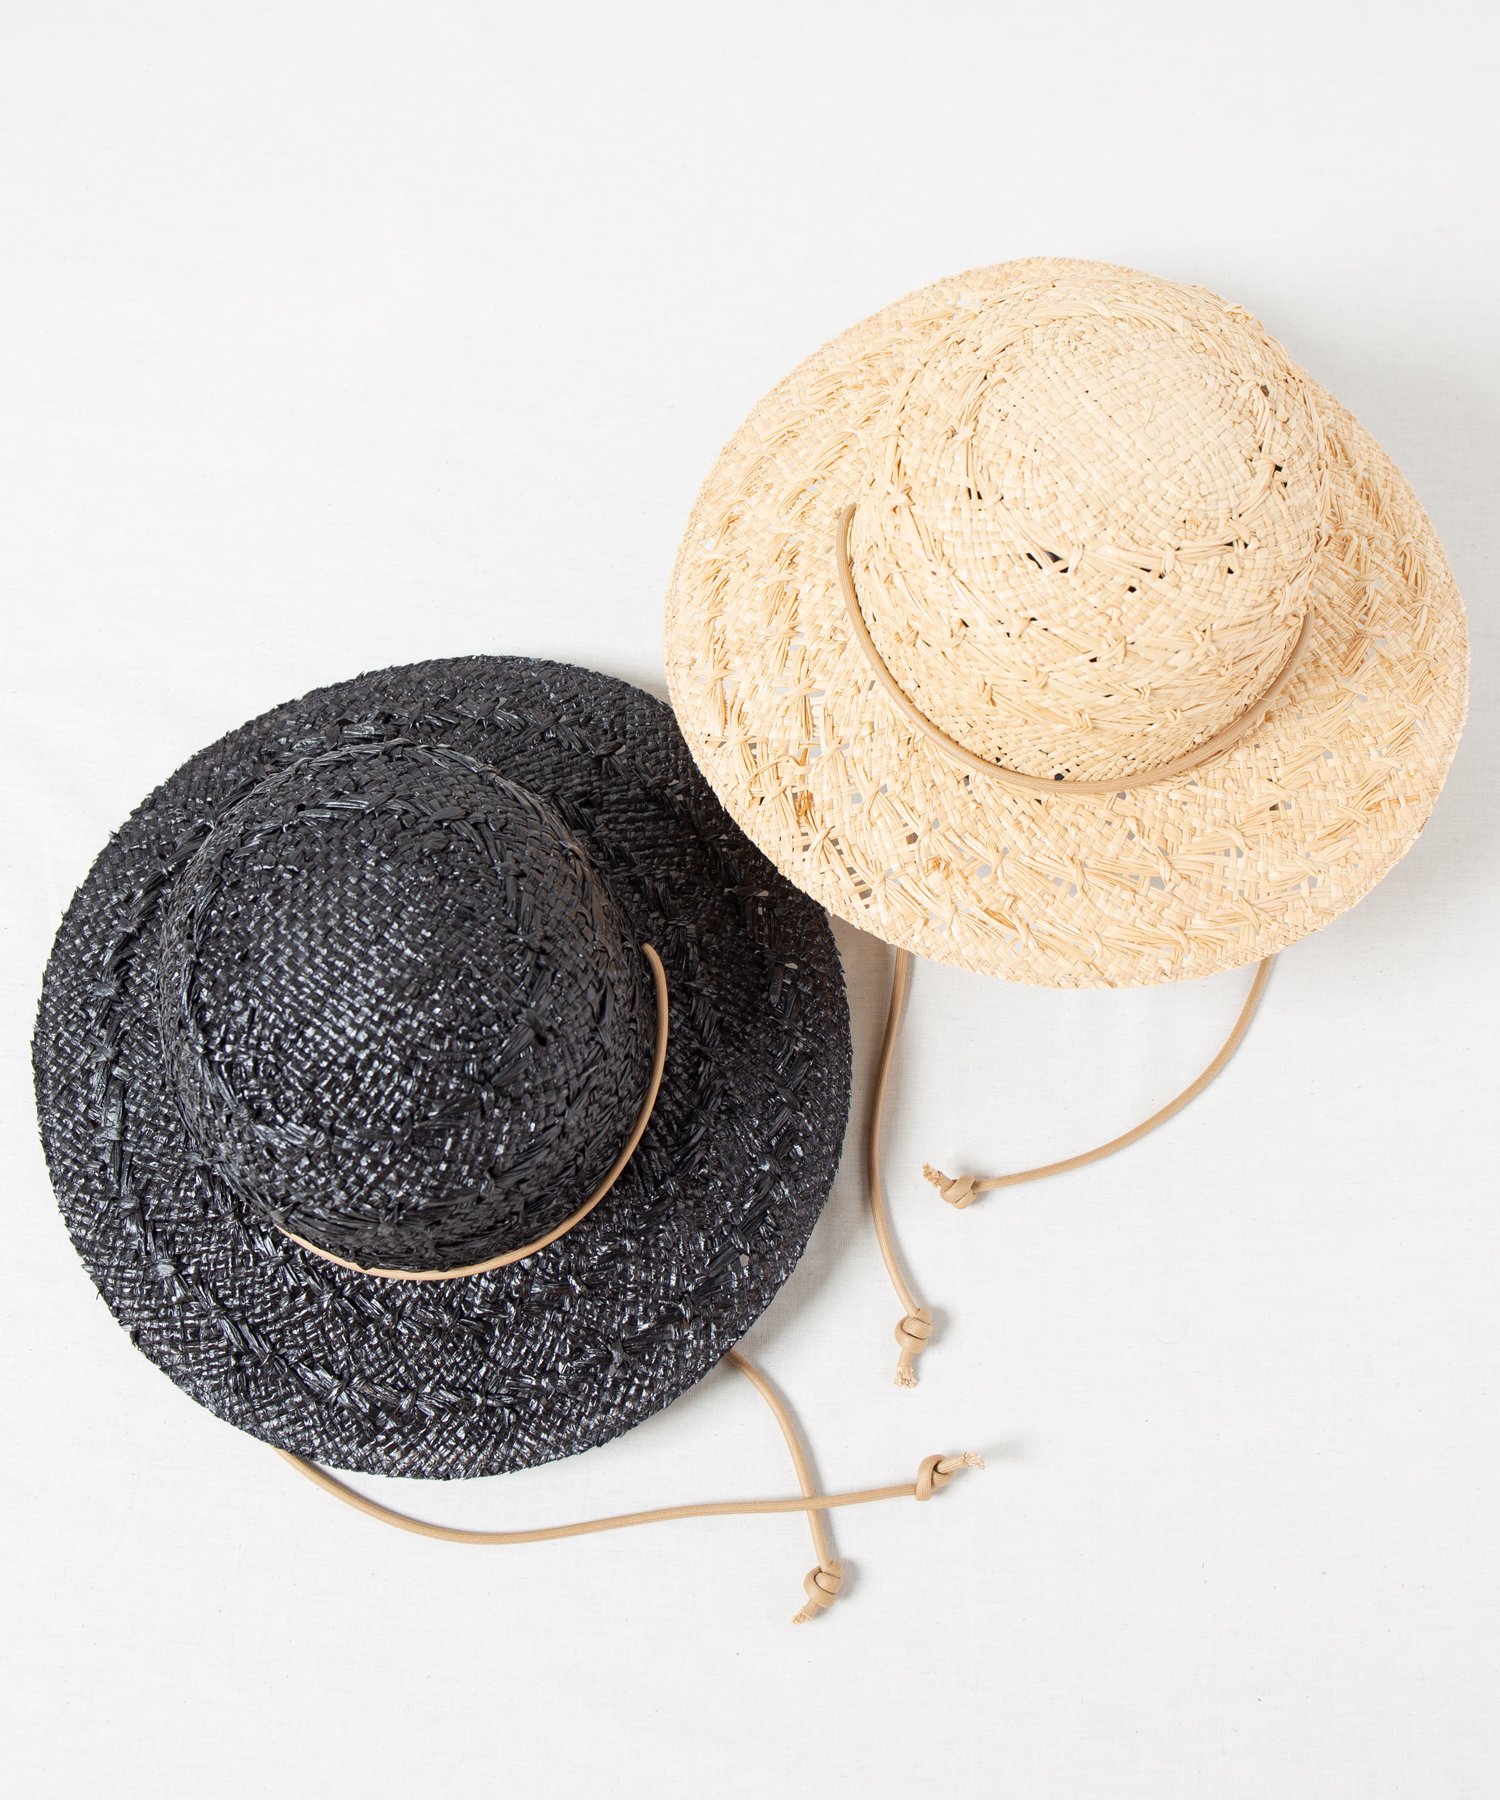 <img class='new_mark_img1' src='https://img.shop-pro.jp/img/new/icons20.gif' style='border:none;display:inline;margin:0px;padding:0px;width:auto;' />【Racal】 Patterned Raffia Hat / レイズストア限定 柄編みラフィアハット